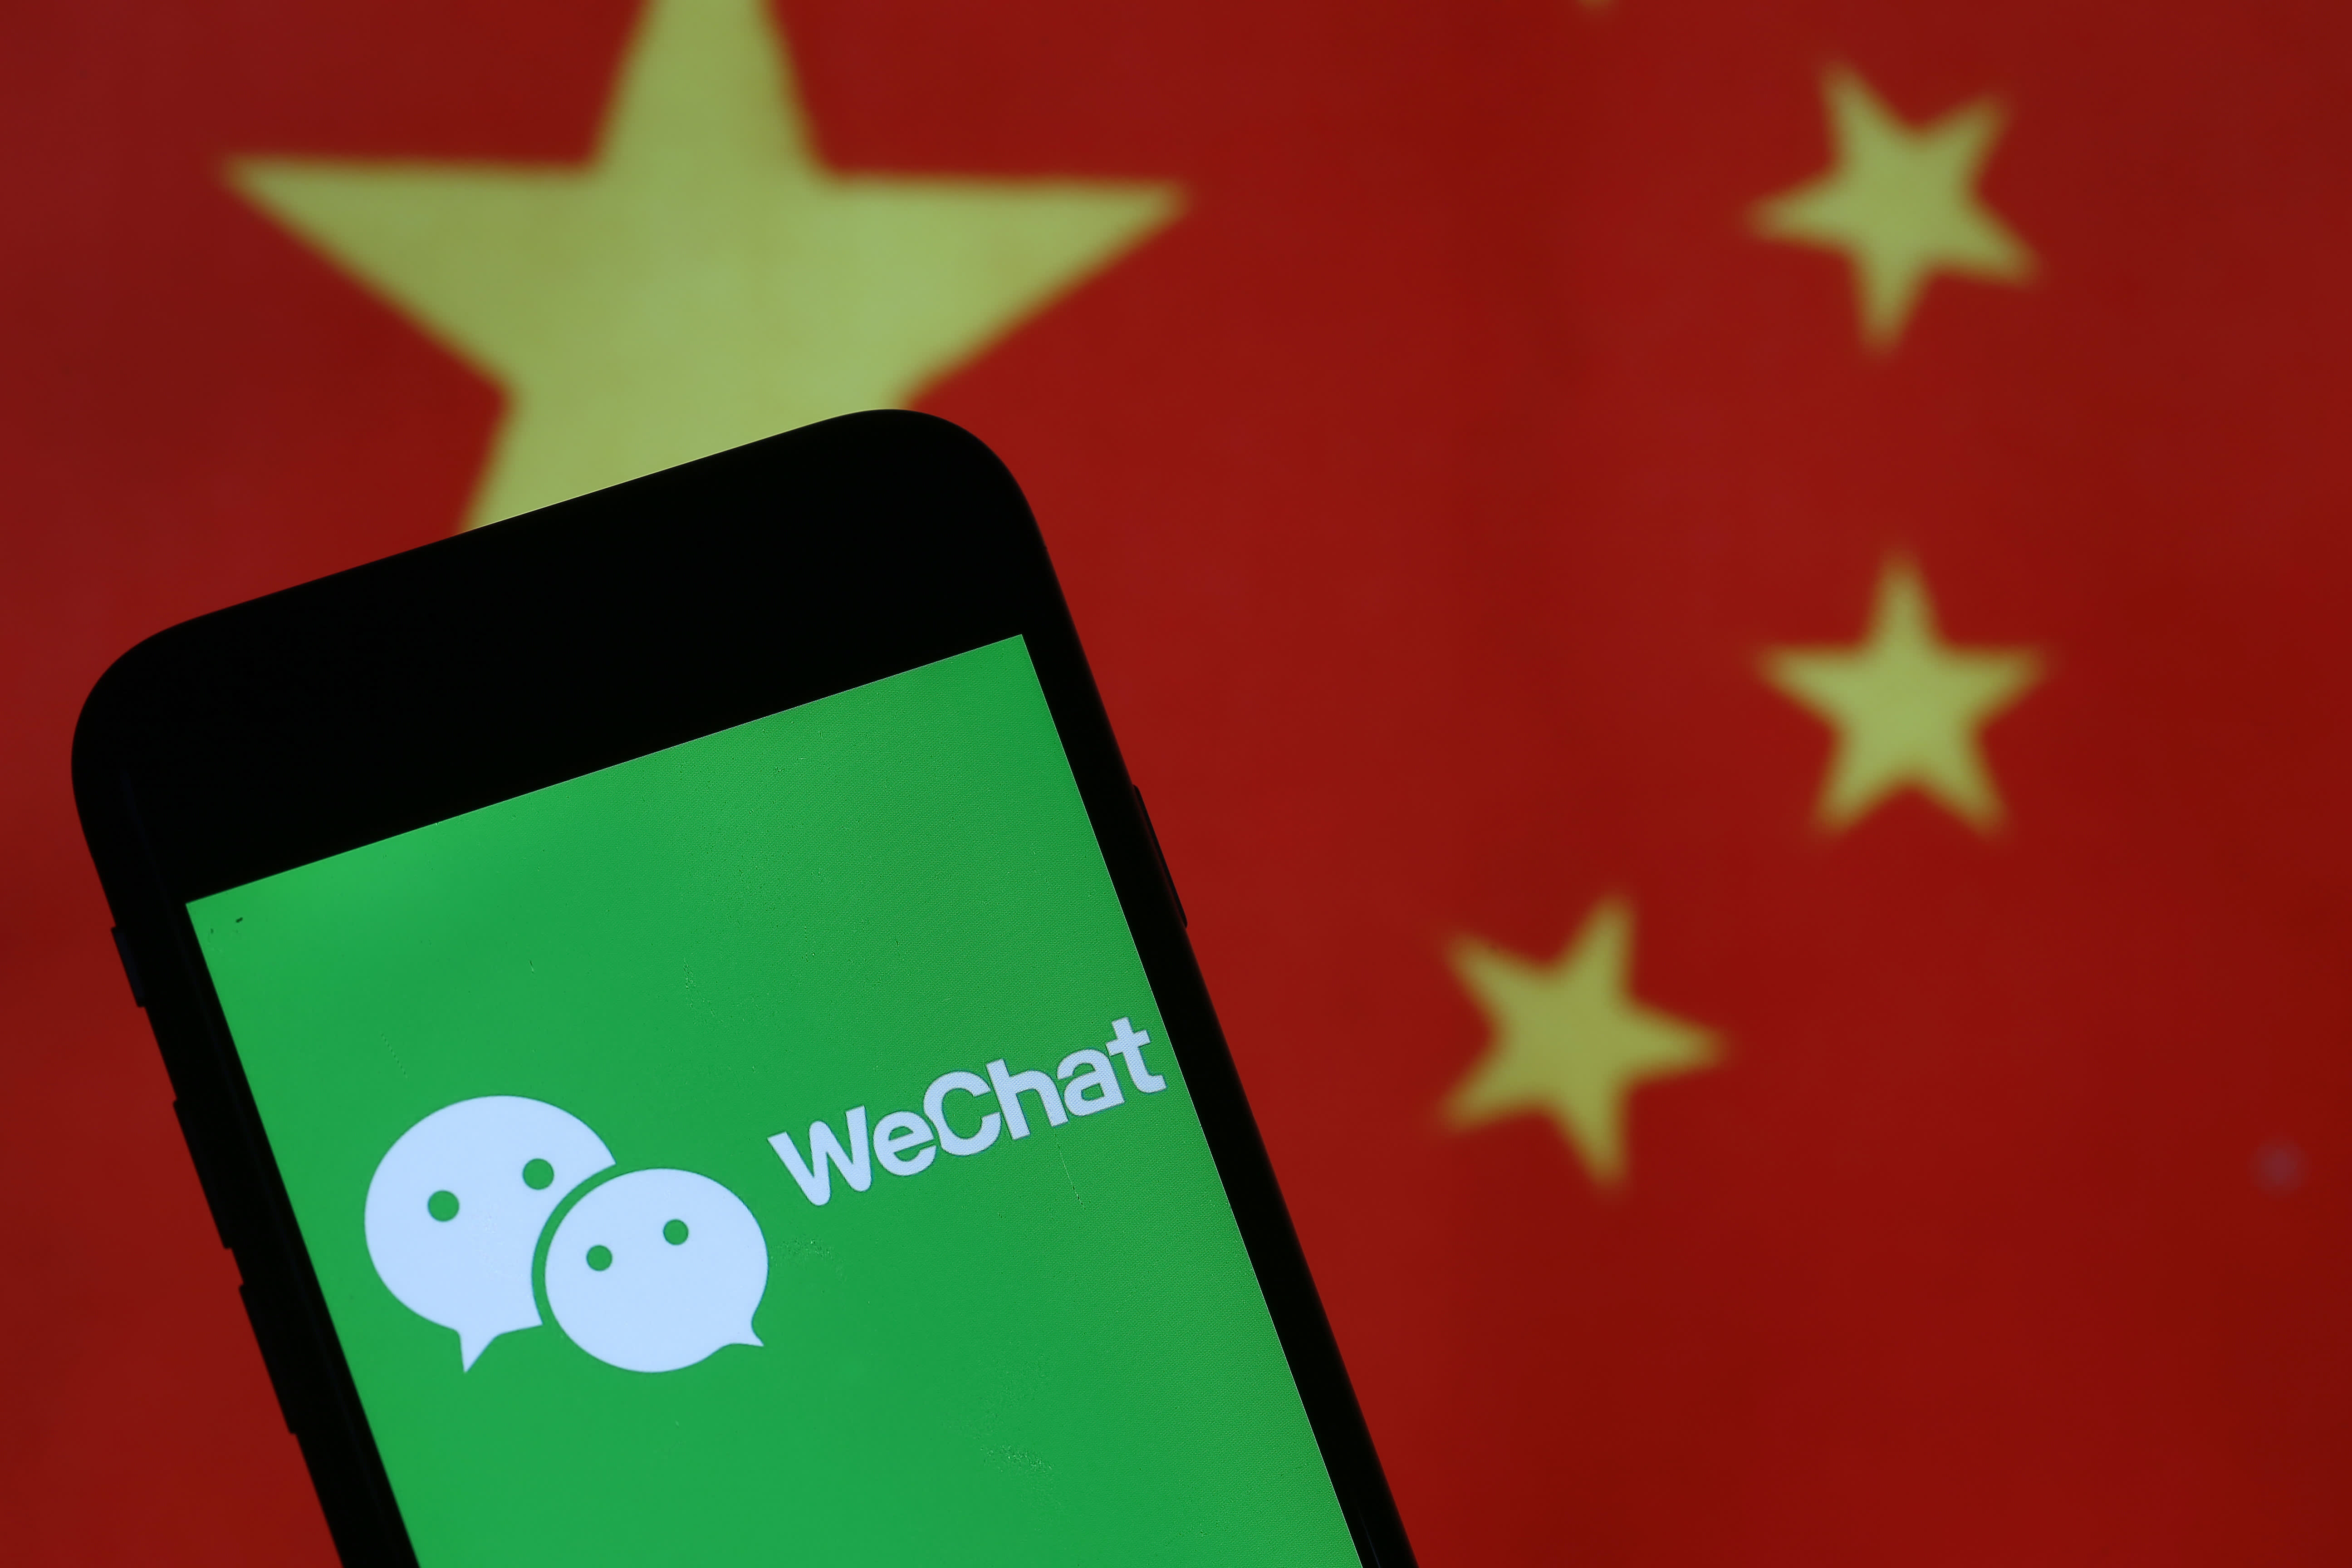 Tencent's WeChat resumes new user registrations in mainland China after suspension